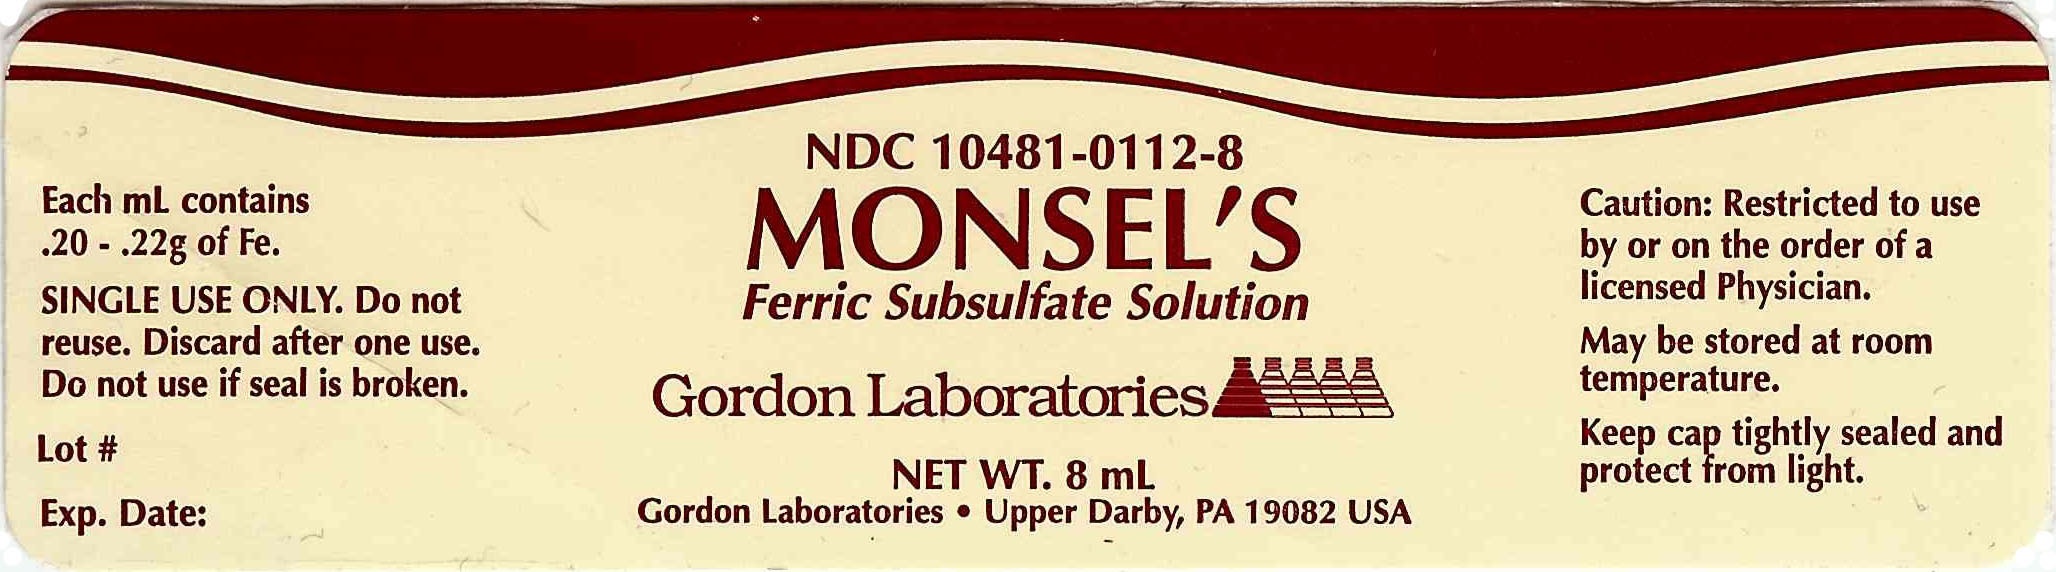 Image of MONSELS Label 